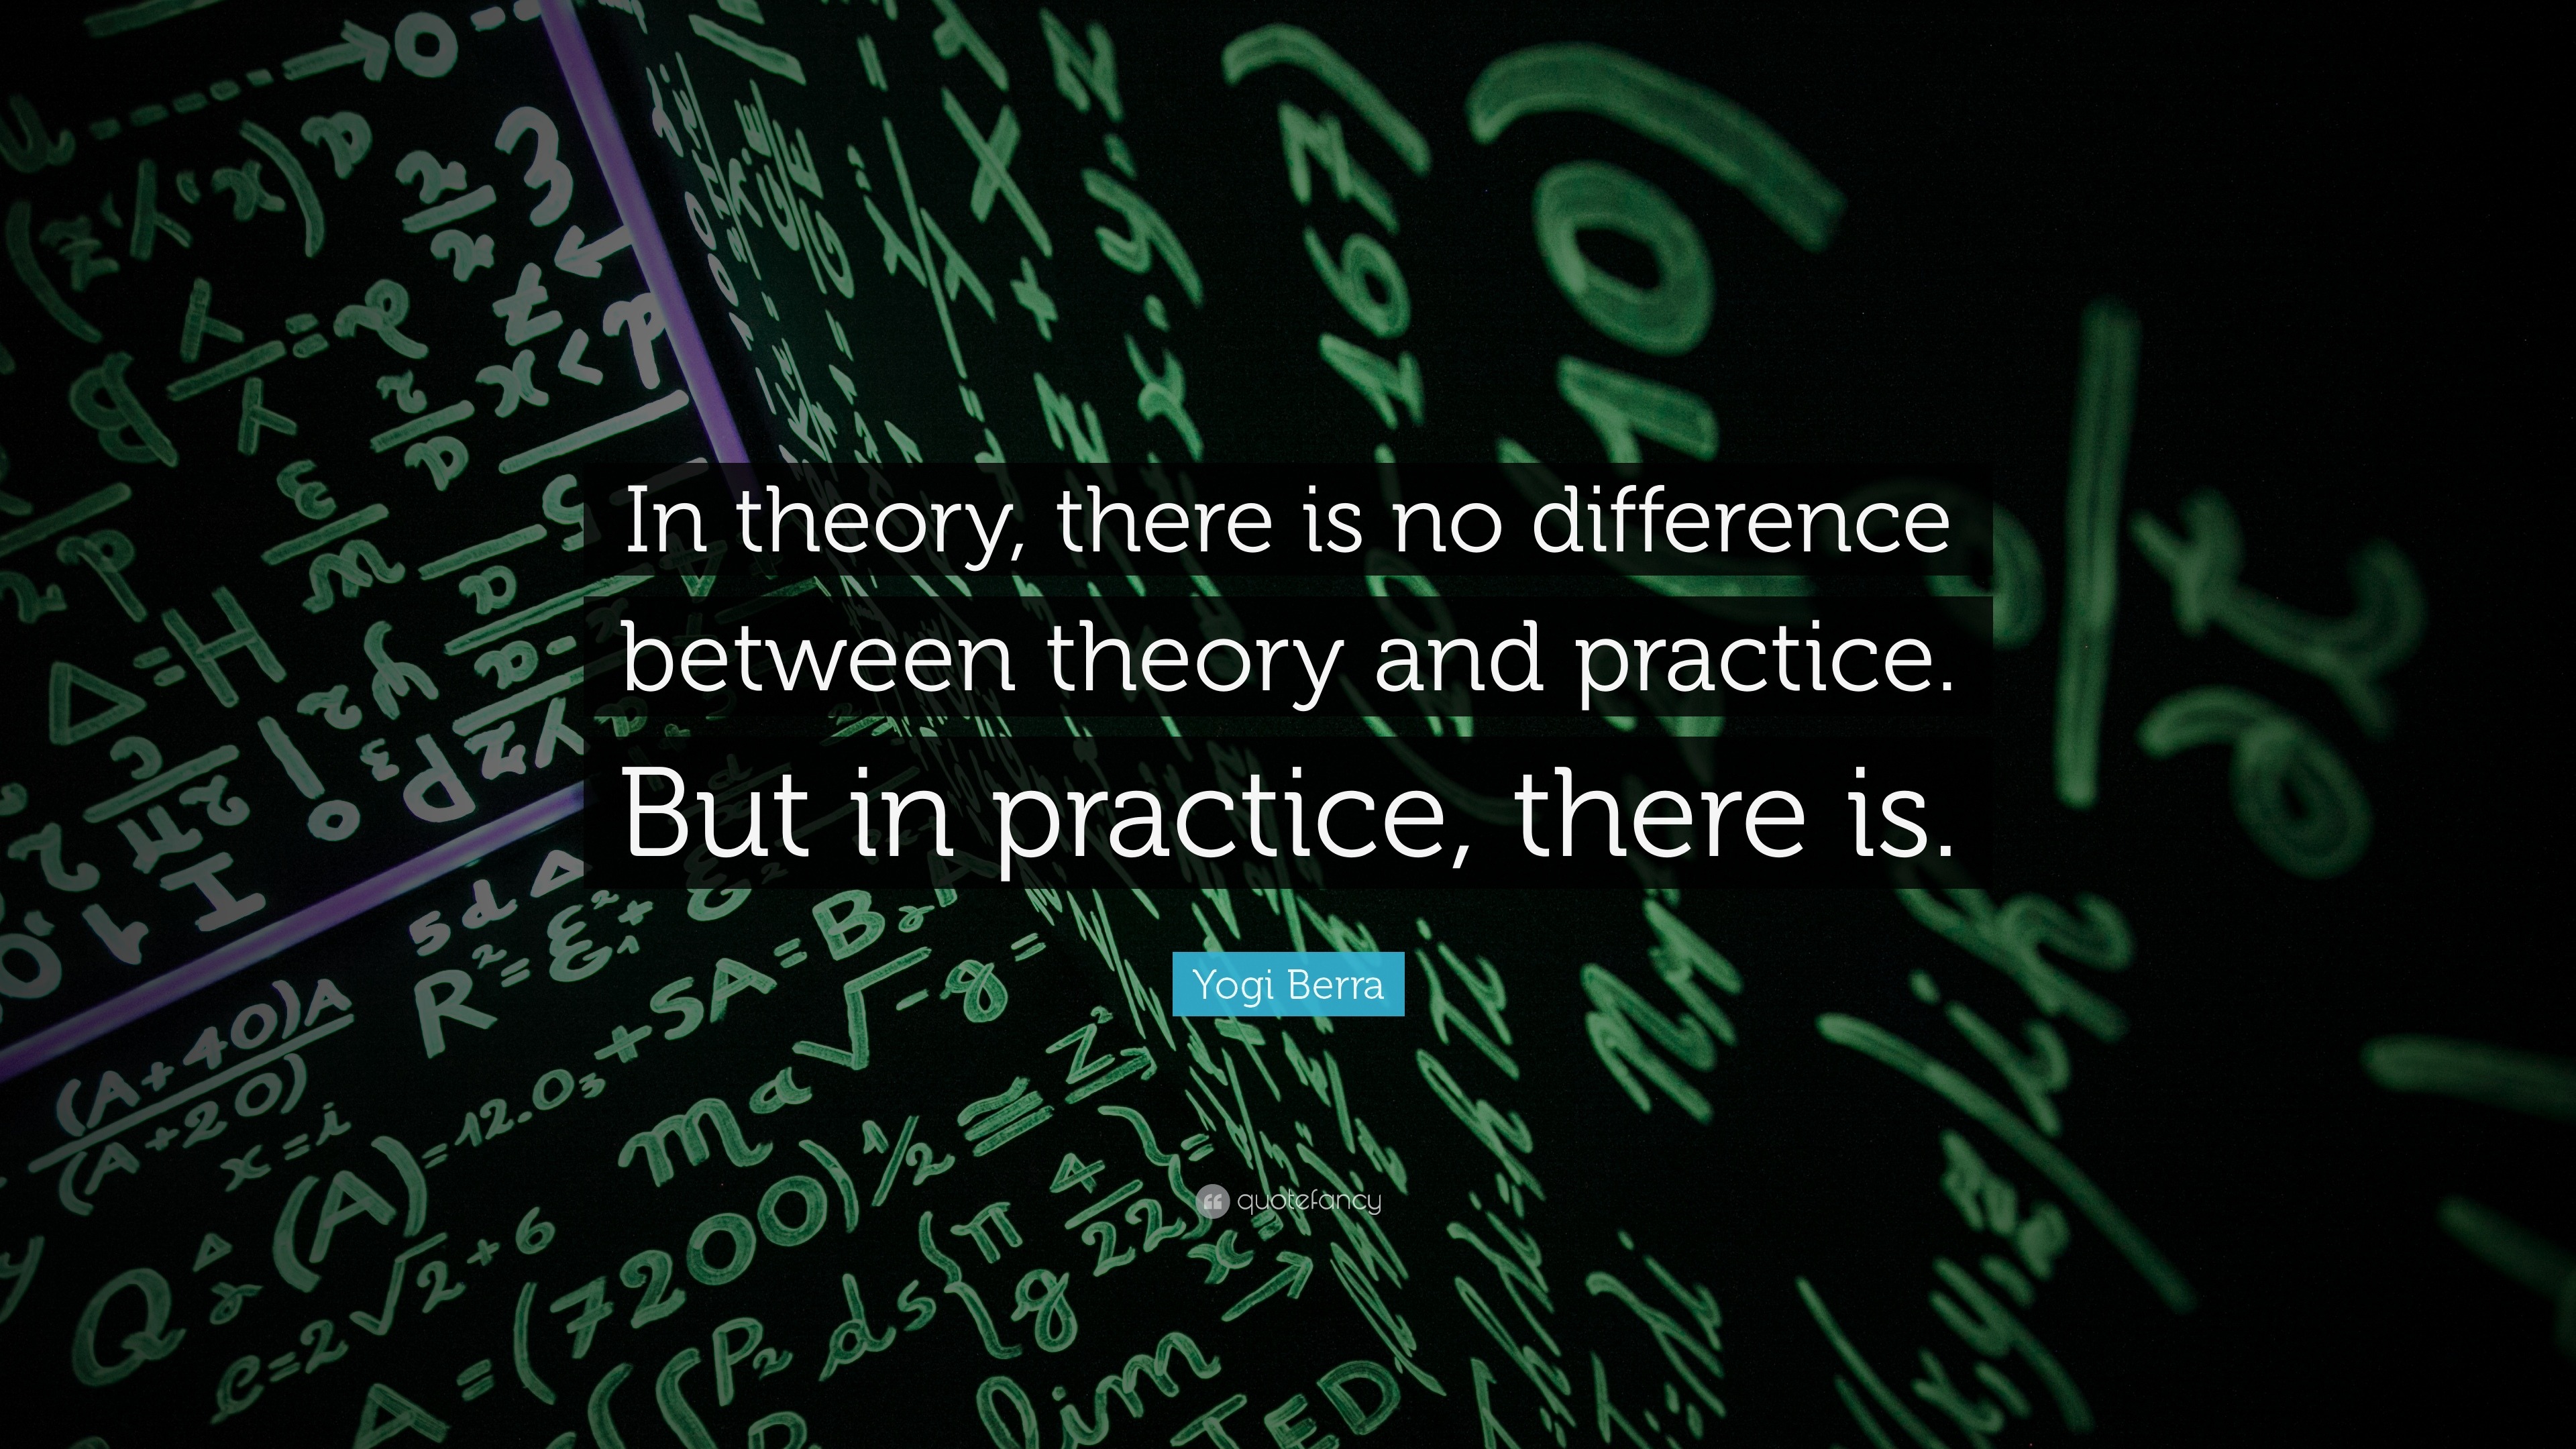 Yogi Berra Quote “in Theory There Is No Difference Between Theory And